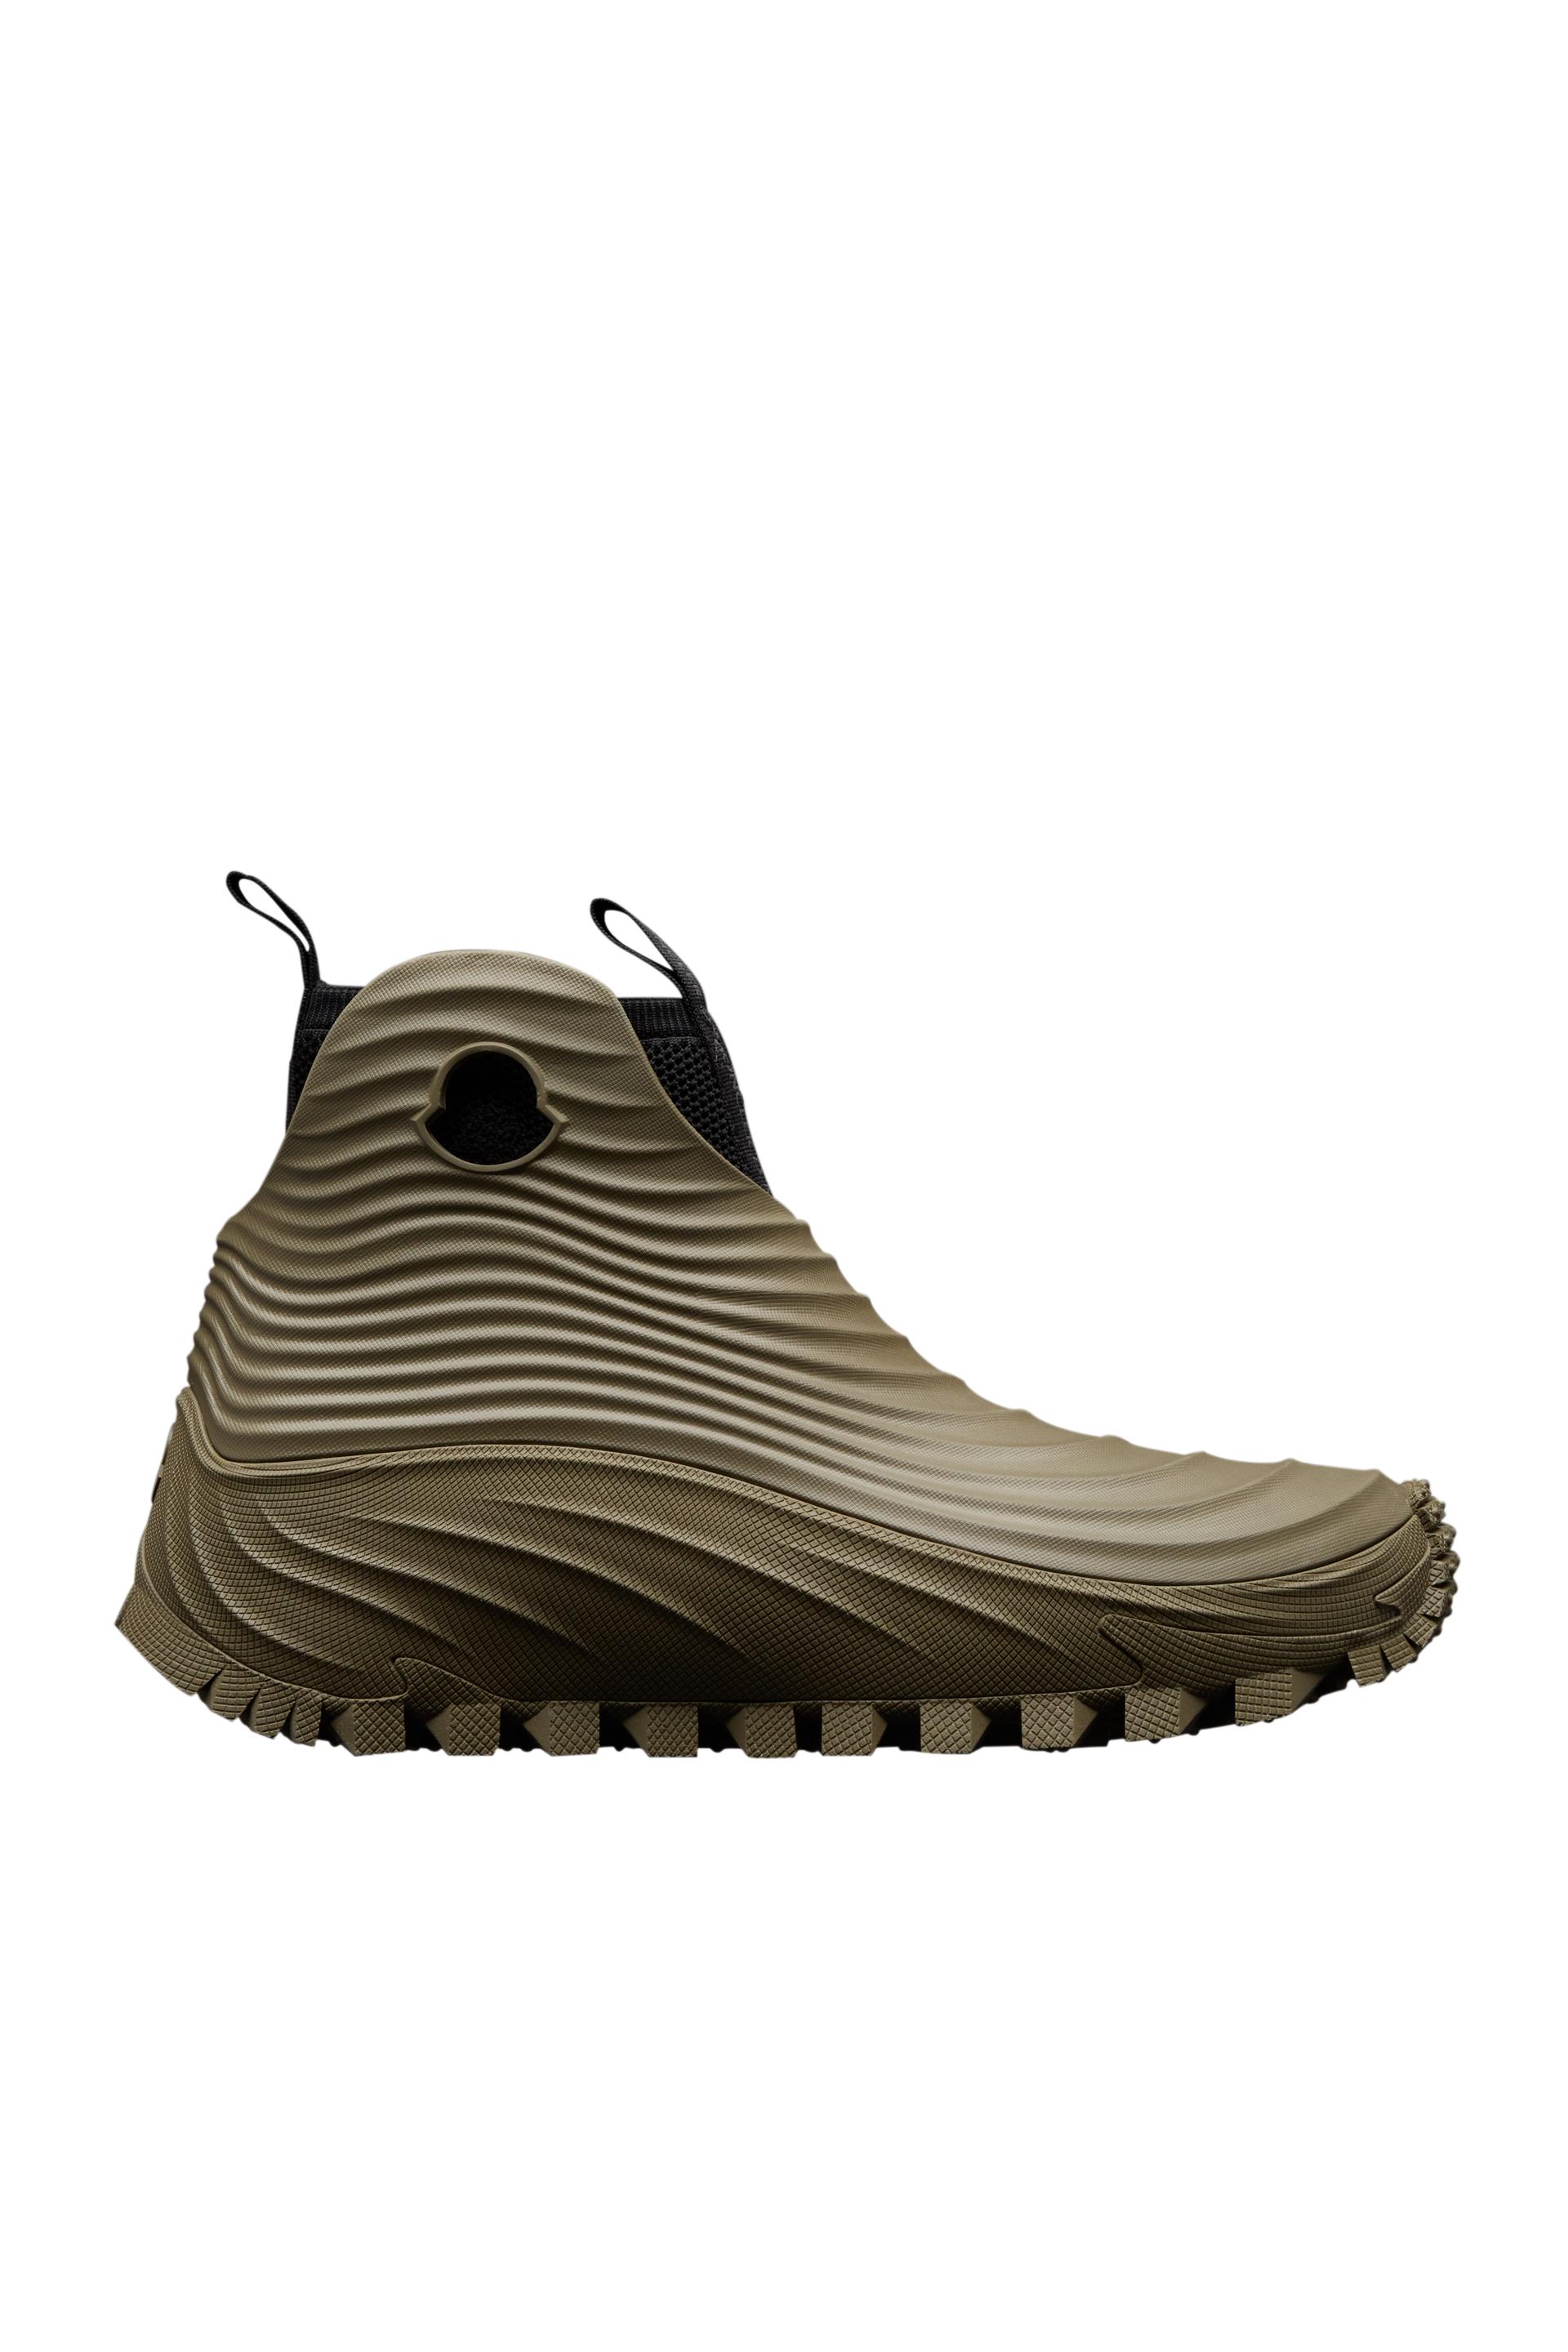 Moncler Acqua High Boots in Brown for Men | Lyst